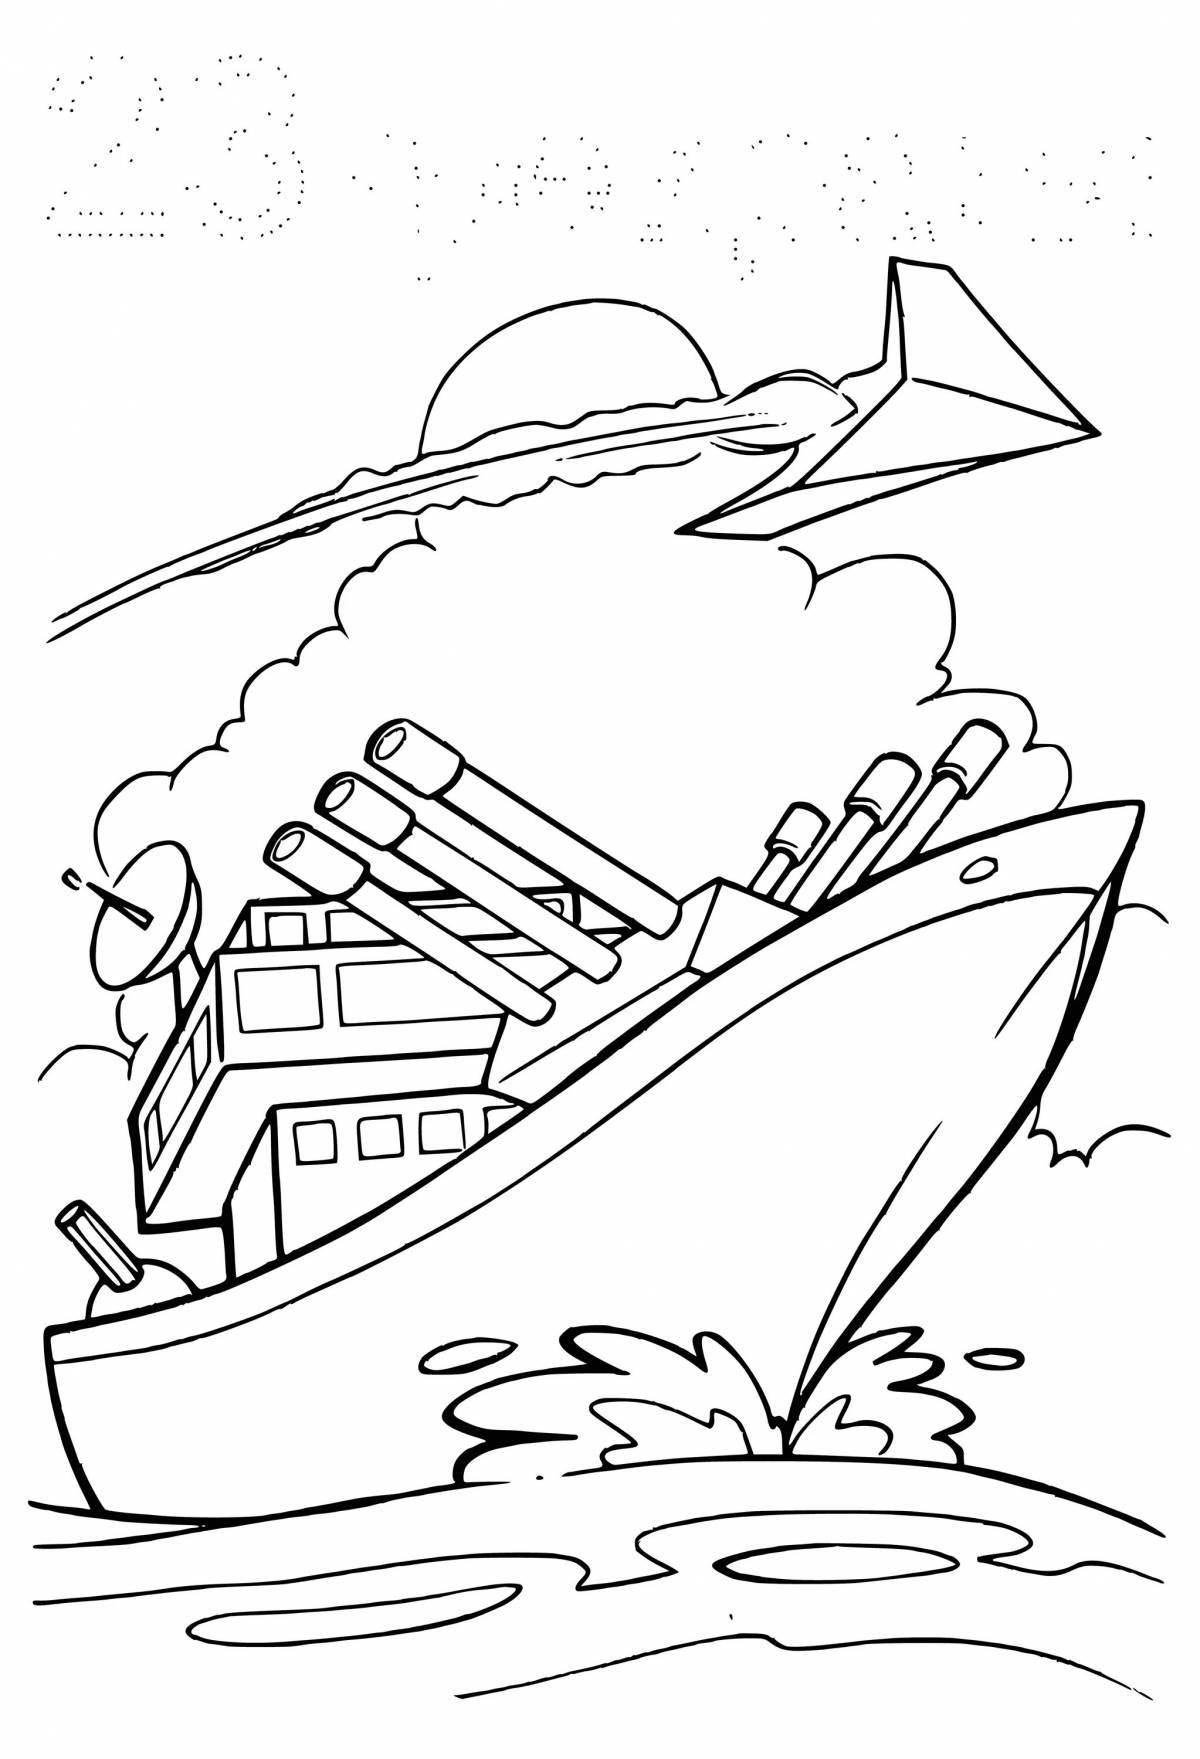 Coloring pages for February 23 for adults